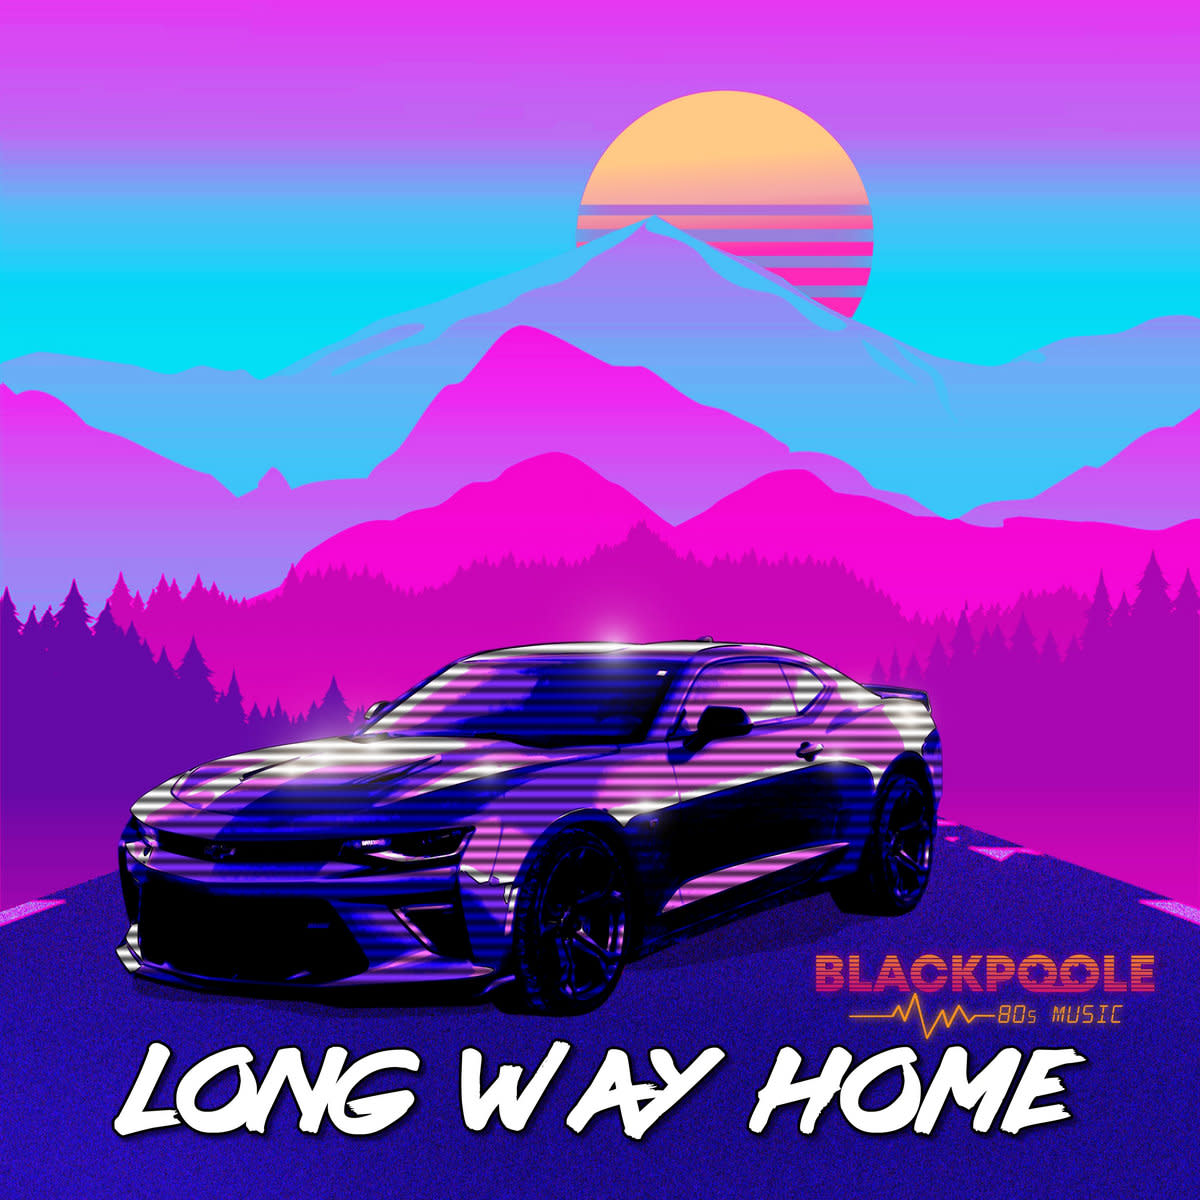 synth-album-review-long-way-home-by-blackpoole